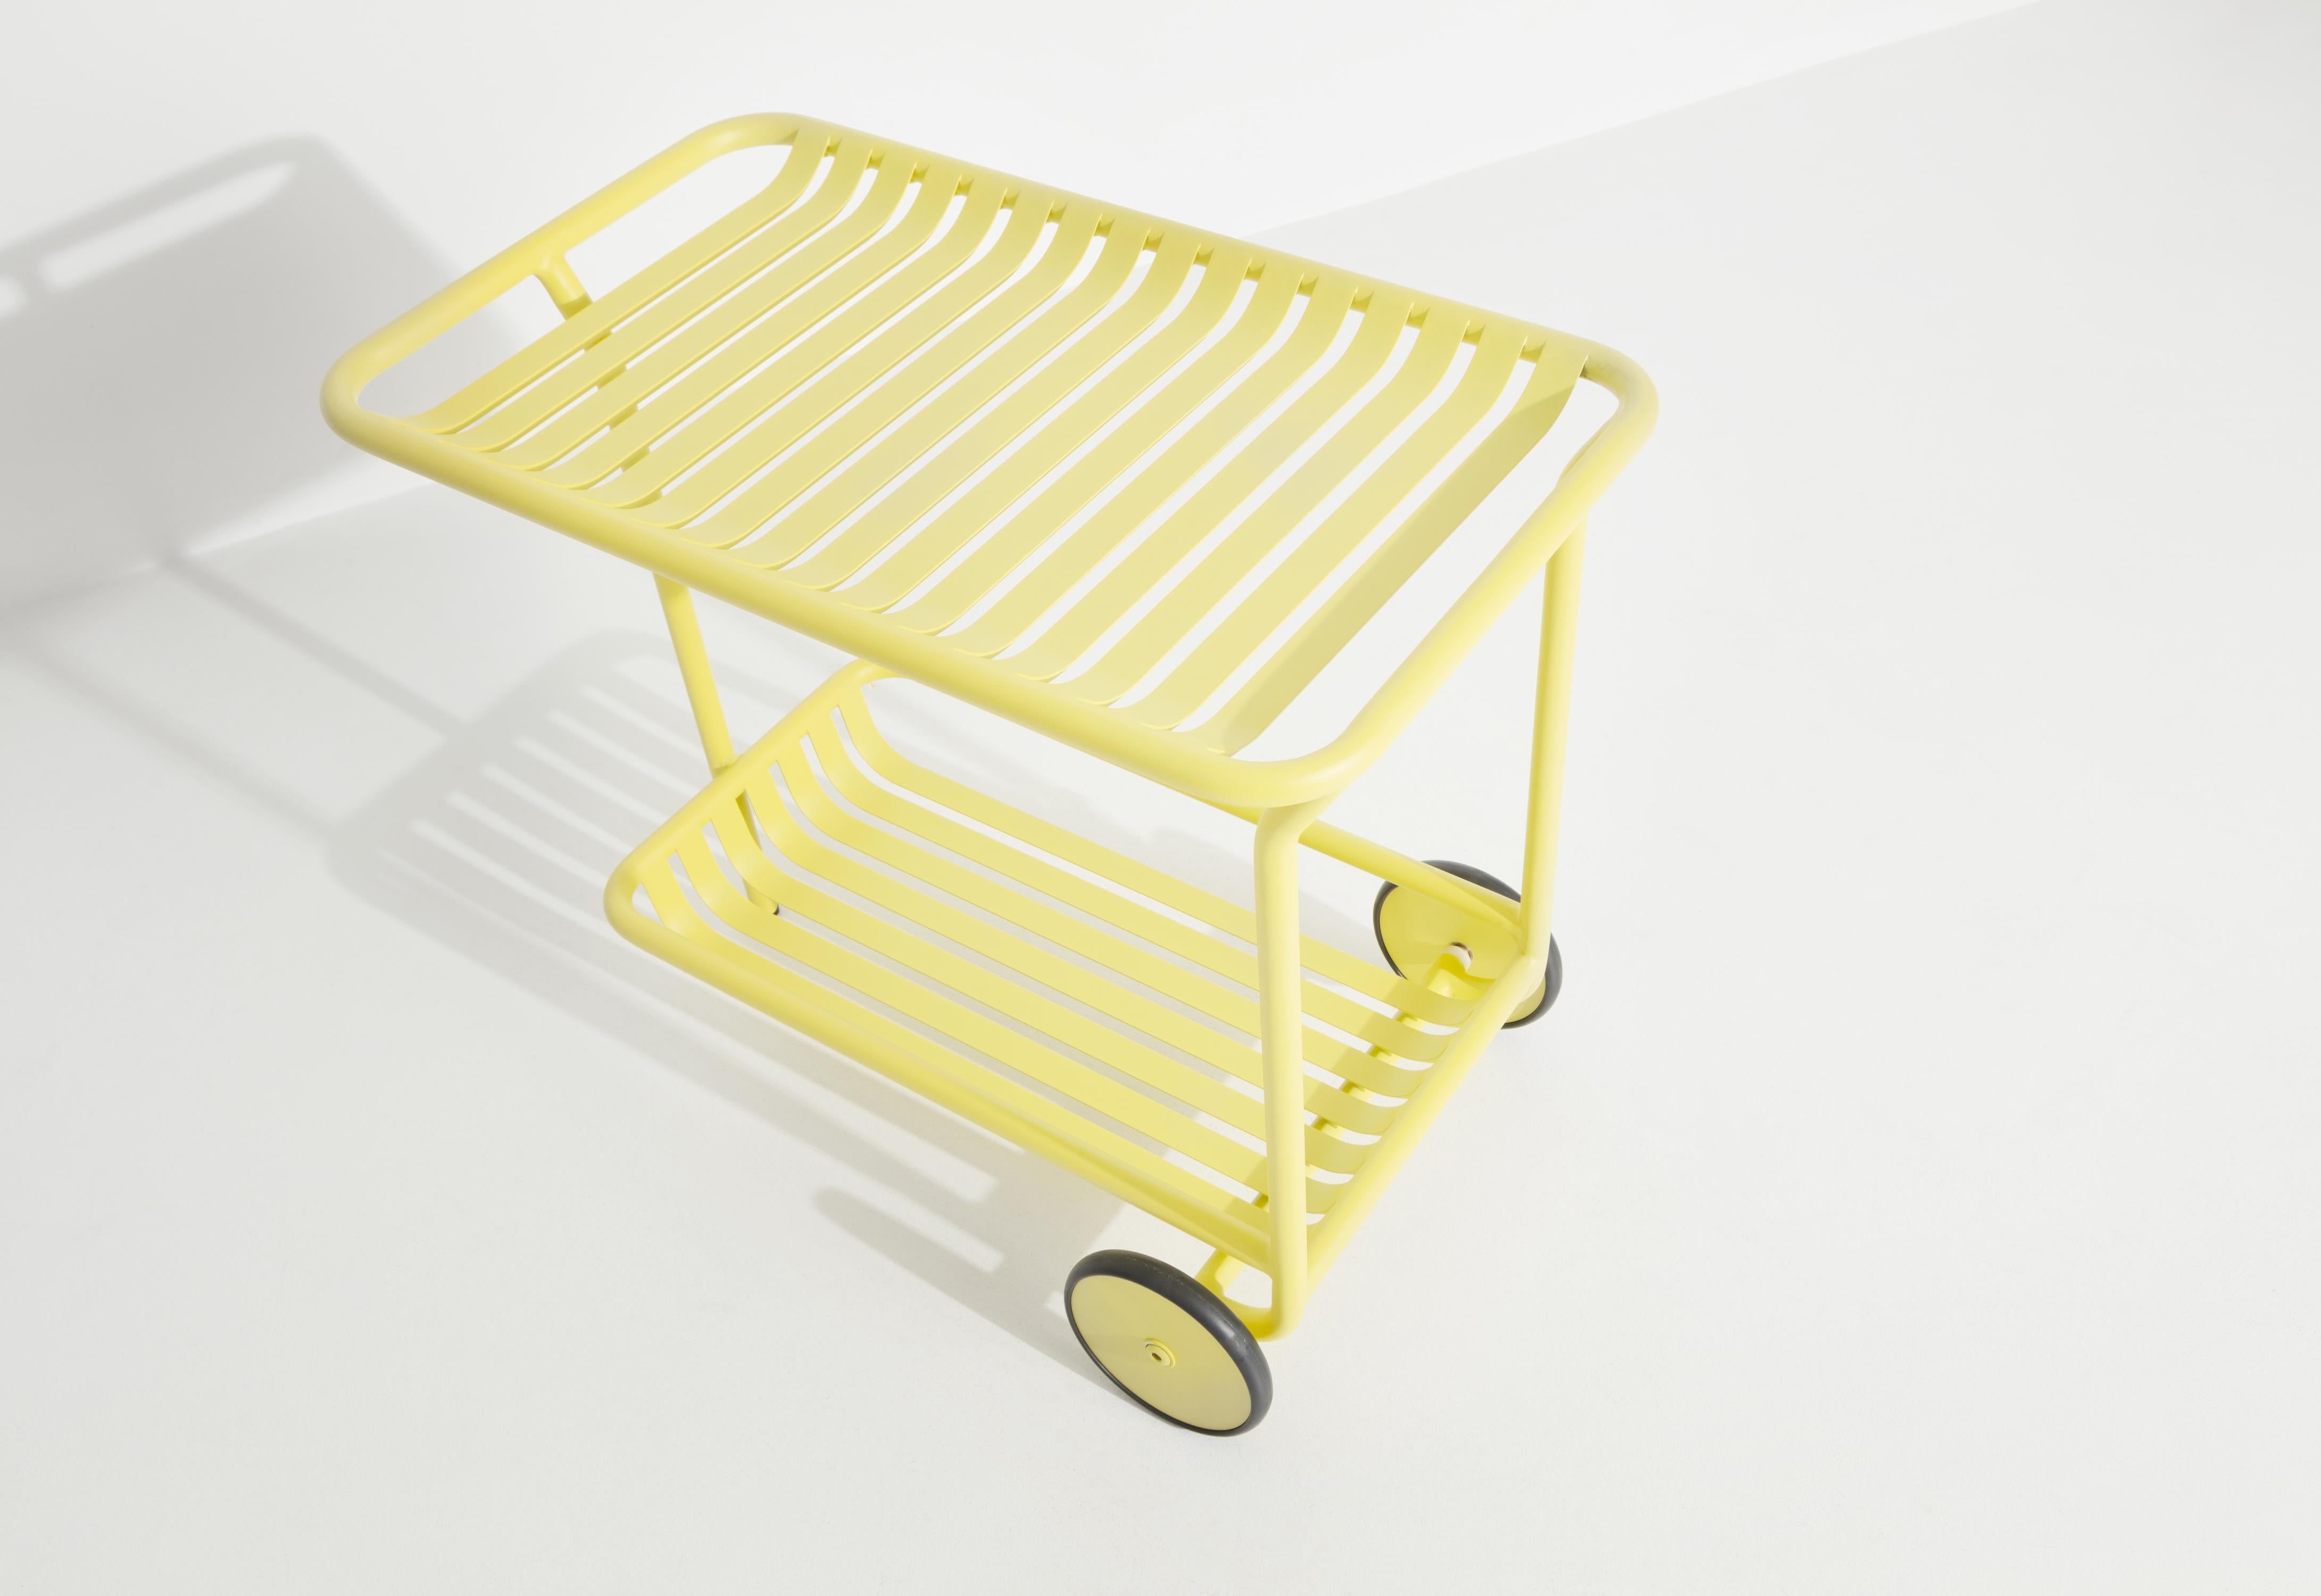 Petite Friture Week-End Trolley in Yellow Aluminium by Studio BrichetZiegler In New Condition For Sale In Brooklyn, NY